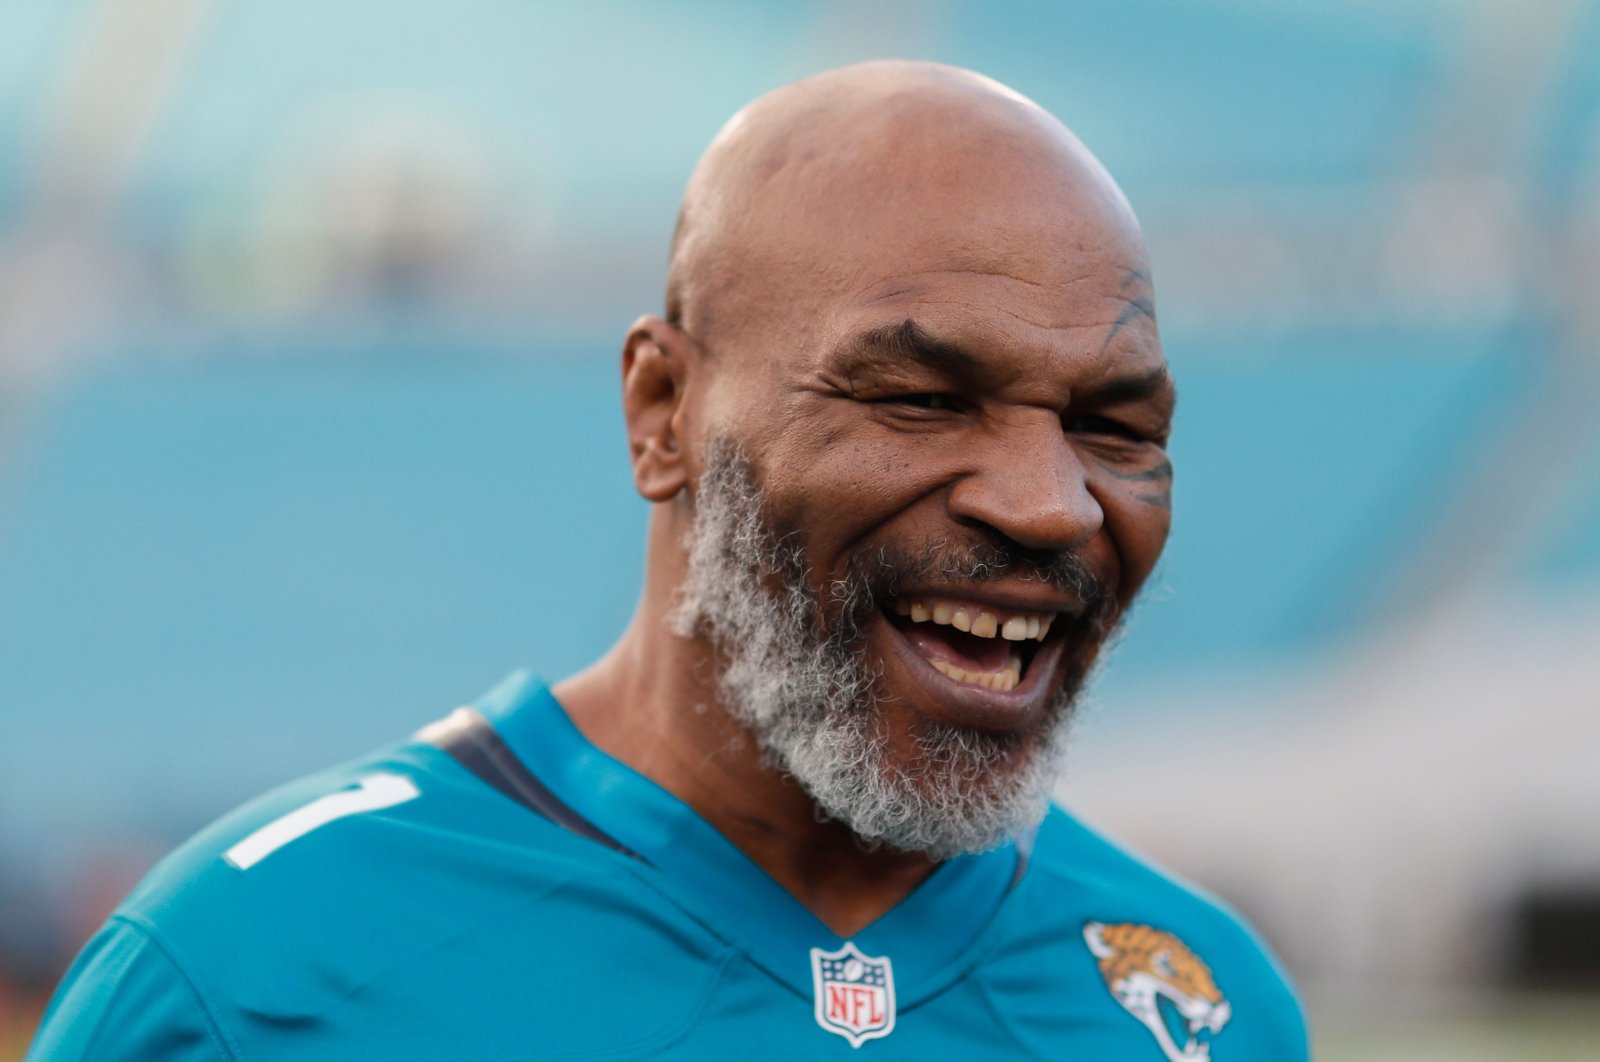 Former world heavyweight champion Mike Tyson before the start of the Tennessee Titans at Jacksonville Jaguars in Jacksonville, Florida on Sept. 19, 2019. (AFP Photo)